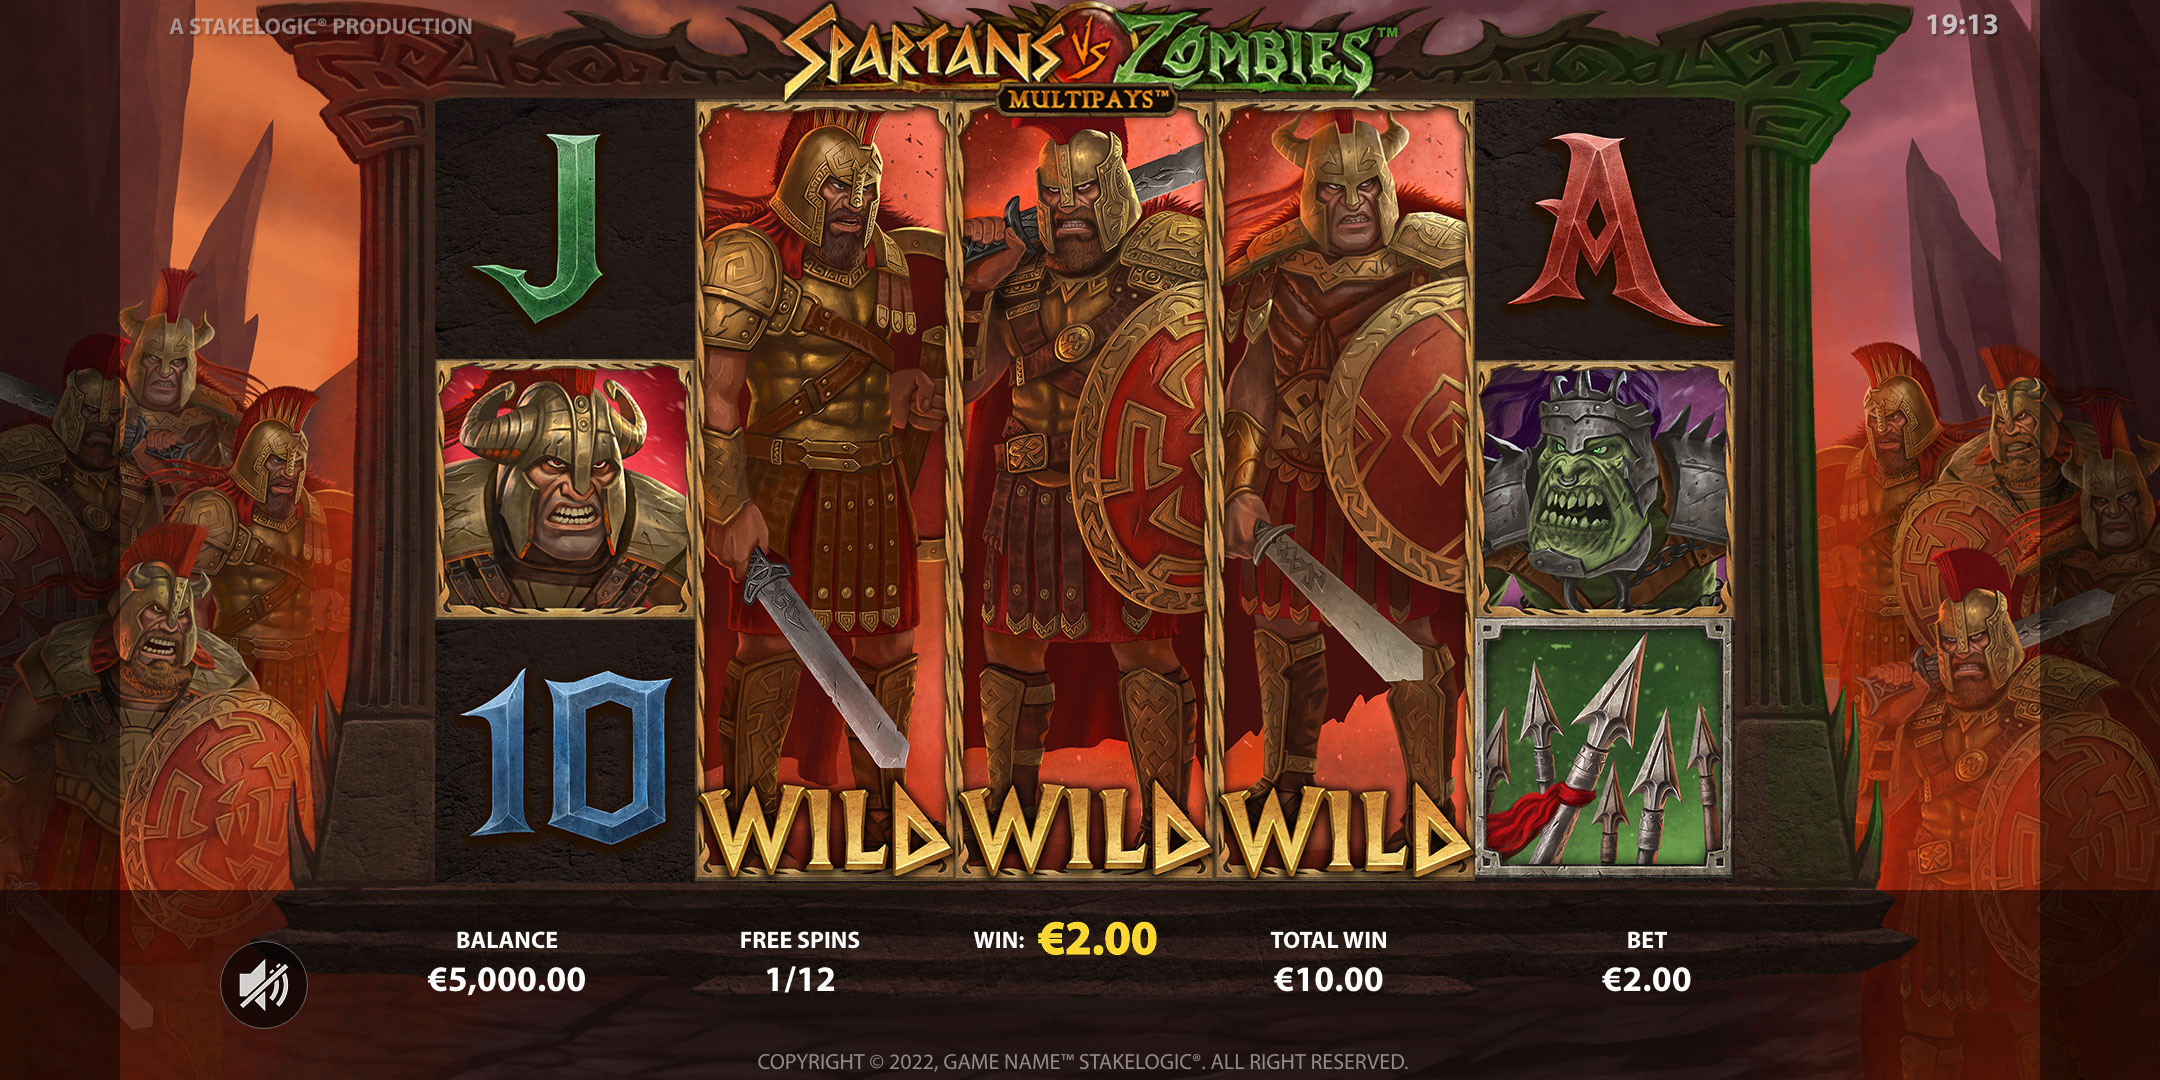 Spartans vs Zombies Multipays™ Wild